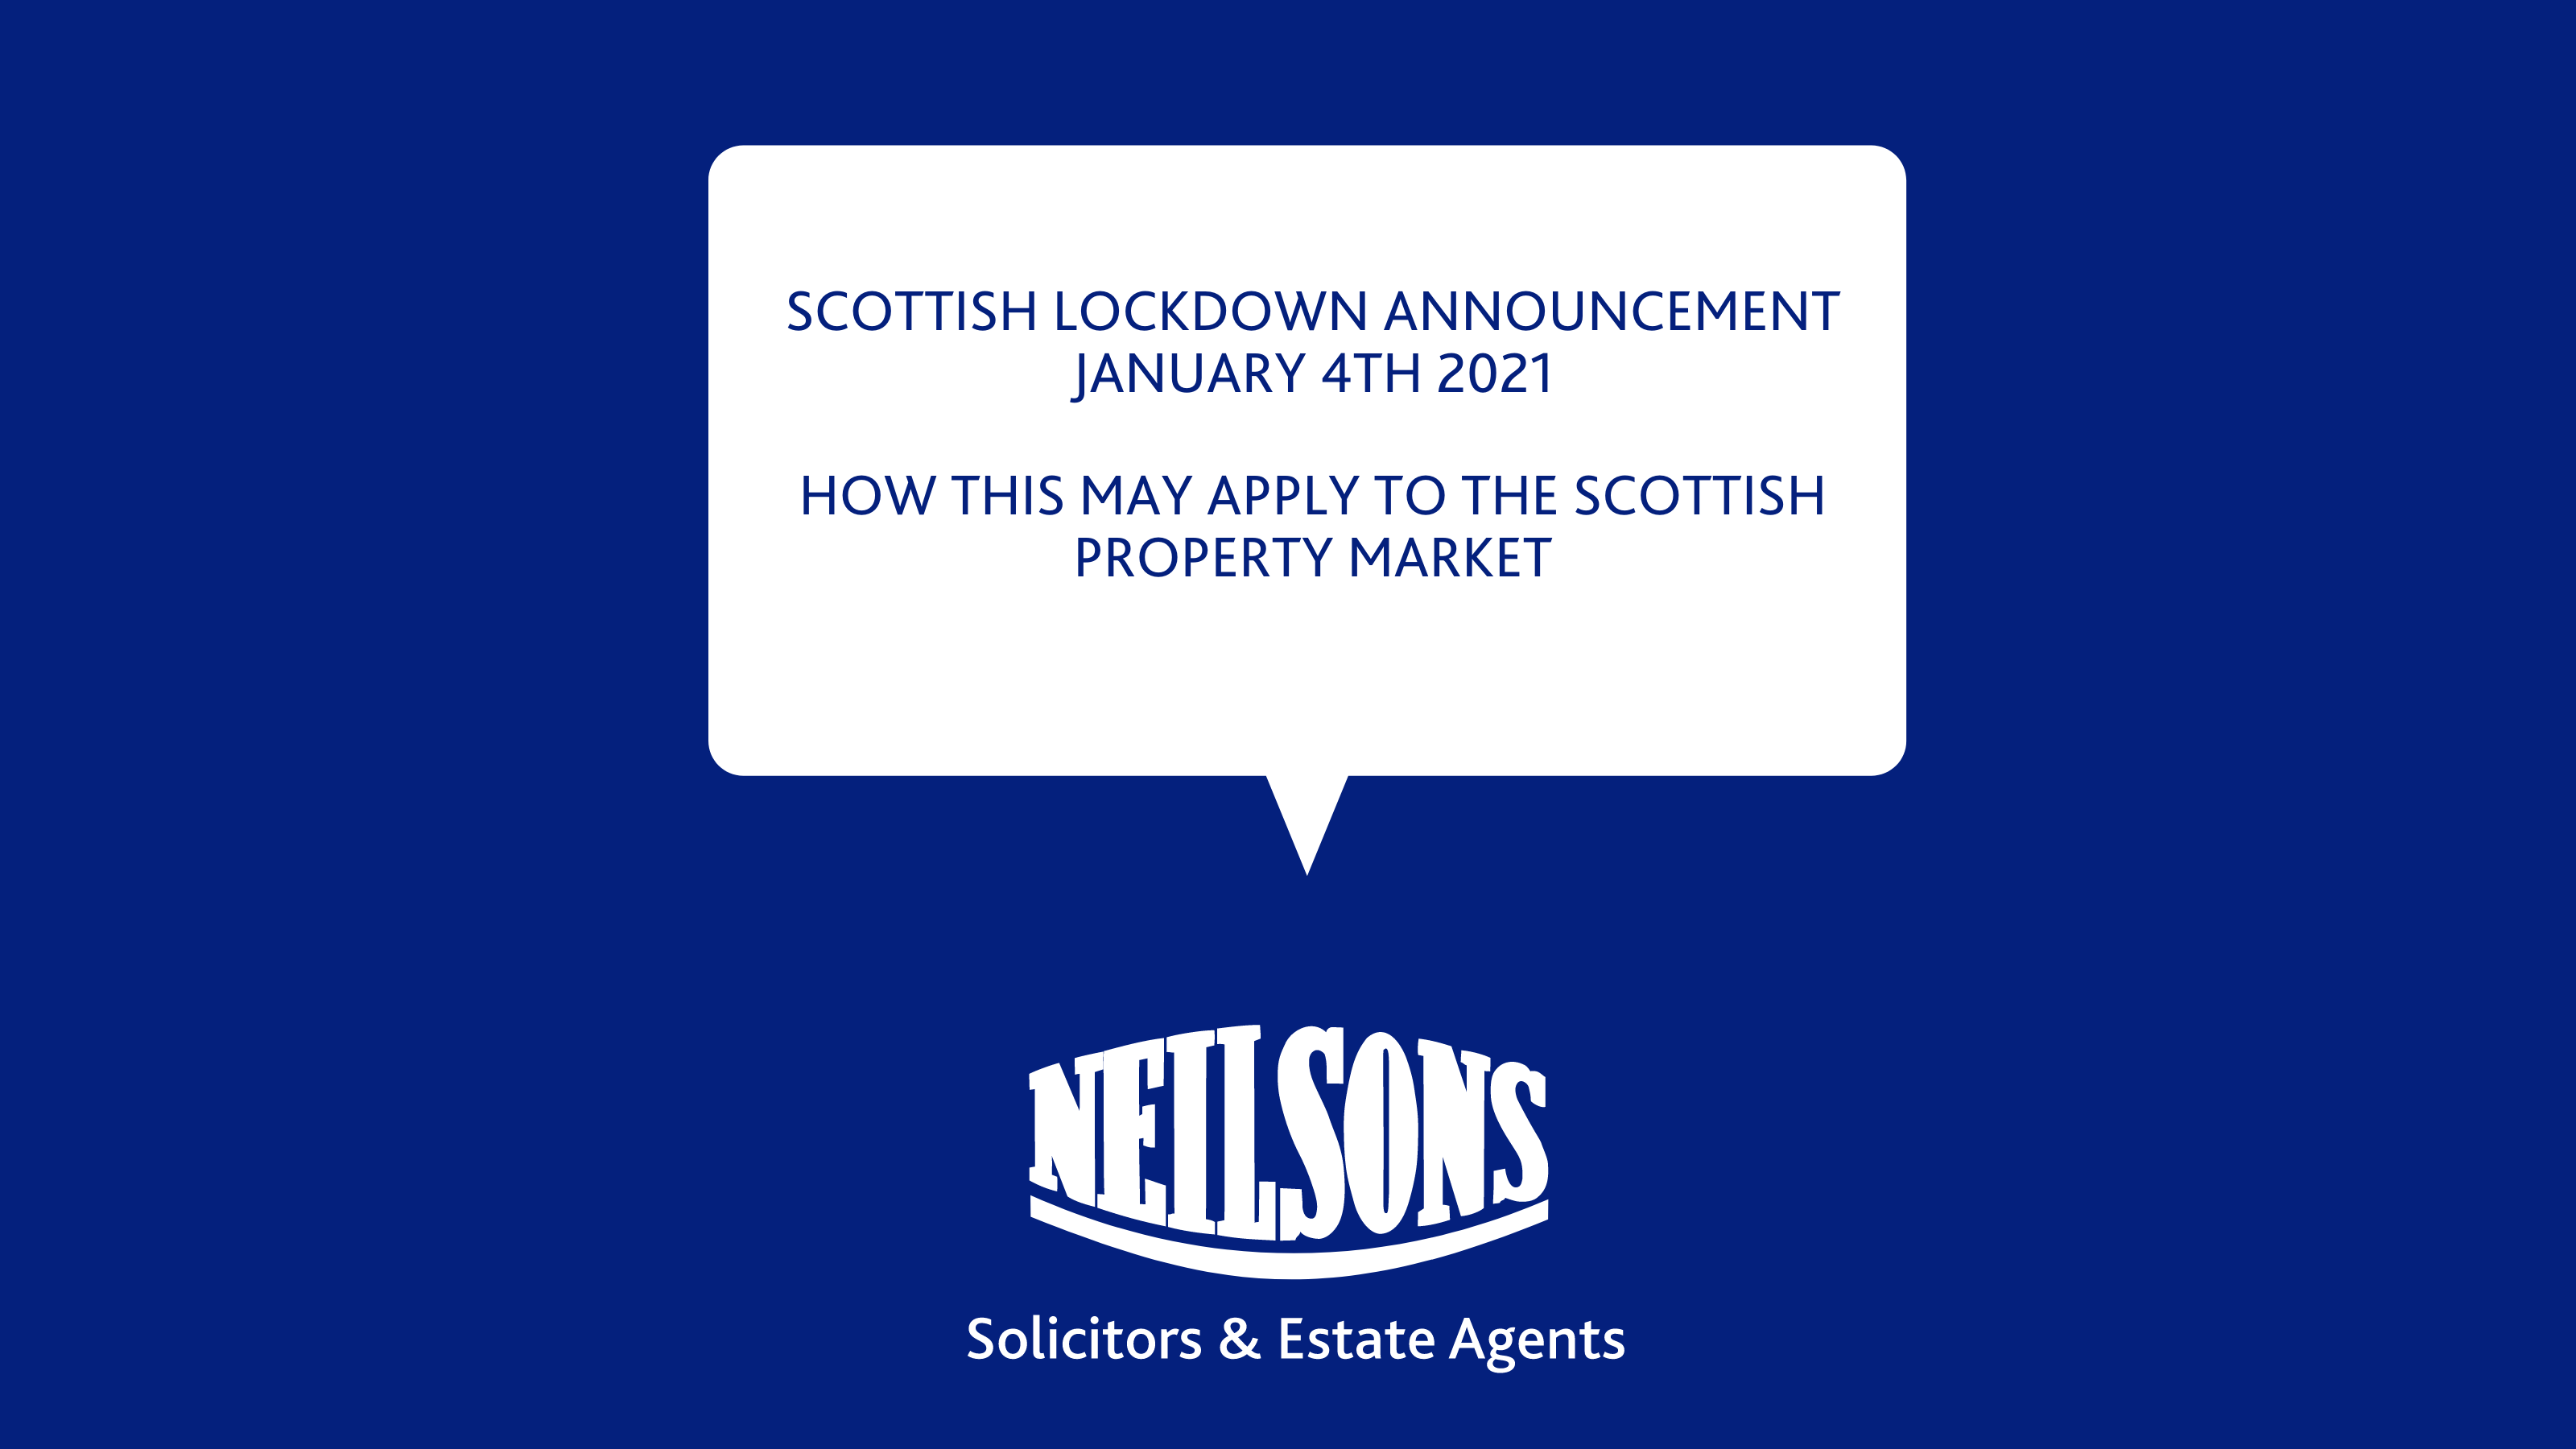 Scottish Lockdown Announcement How This May Affect the Scottish Property Market